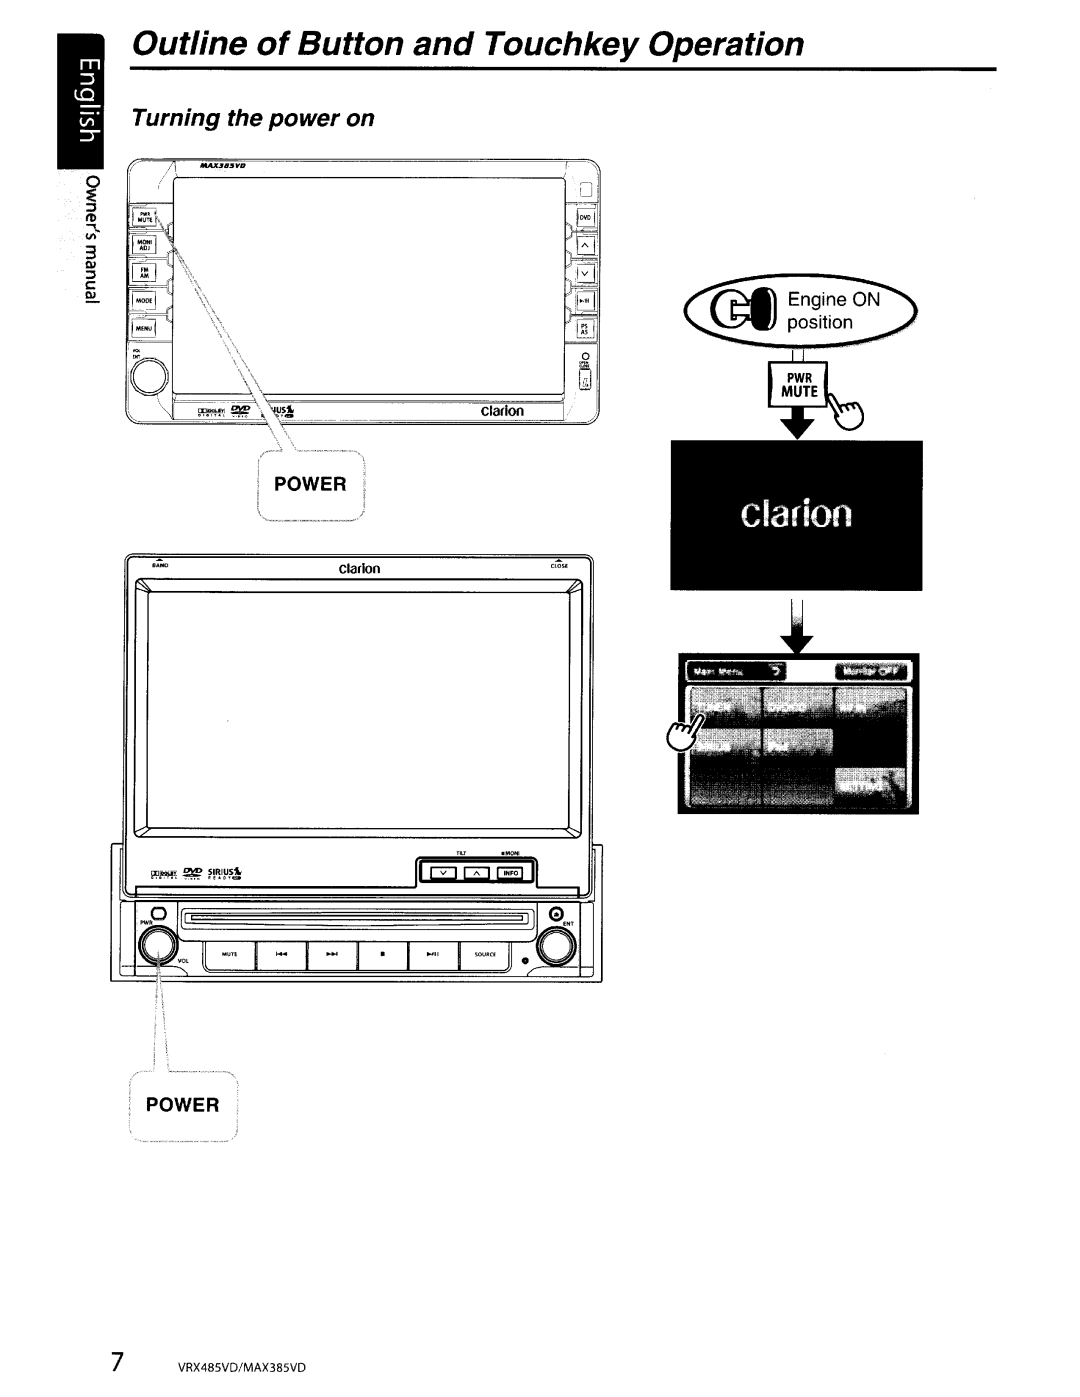 Clarion VRX485VD O~ll .on I, Outline of Button and Touchkey Operation, Turning the power on, Ii Gj Gj ~, clarion, Clarion 